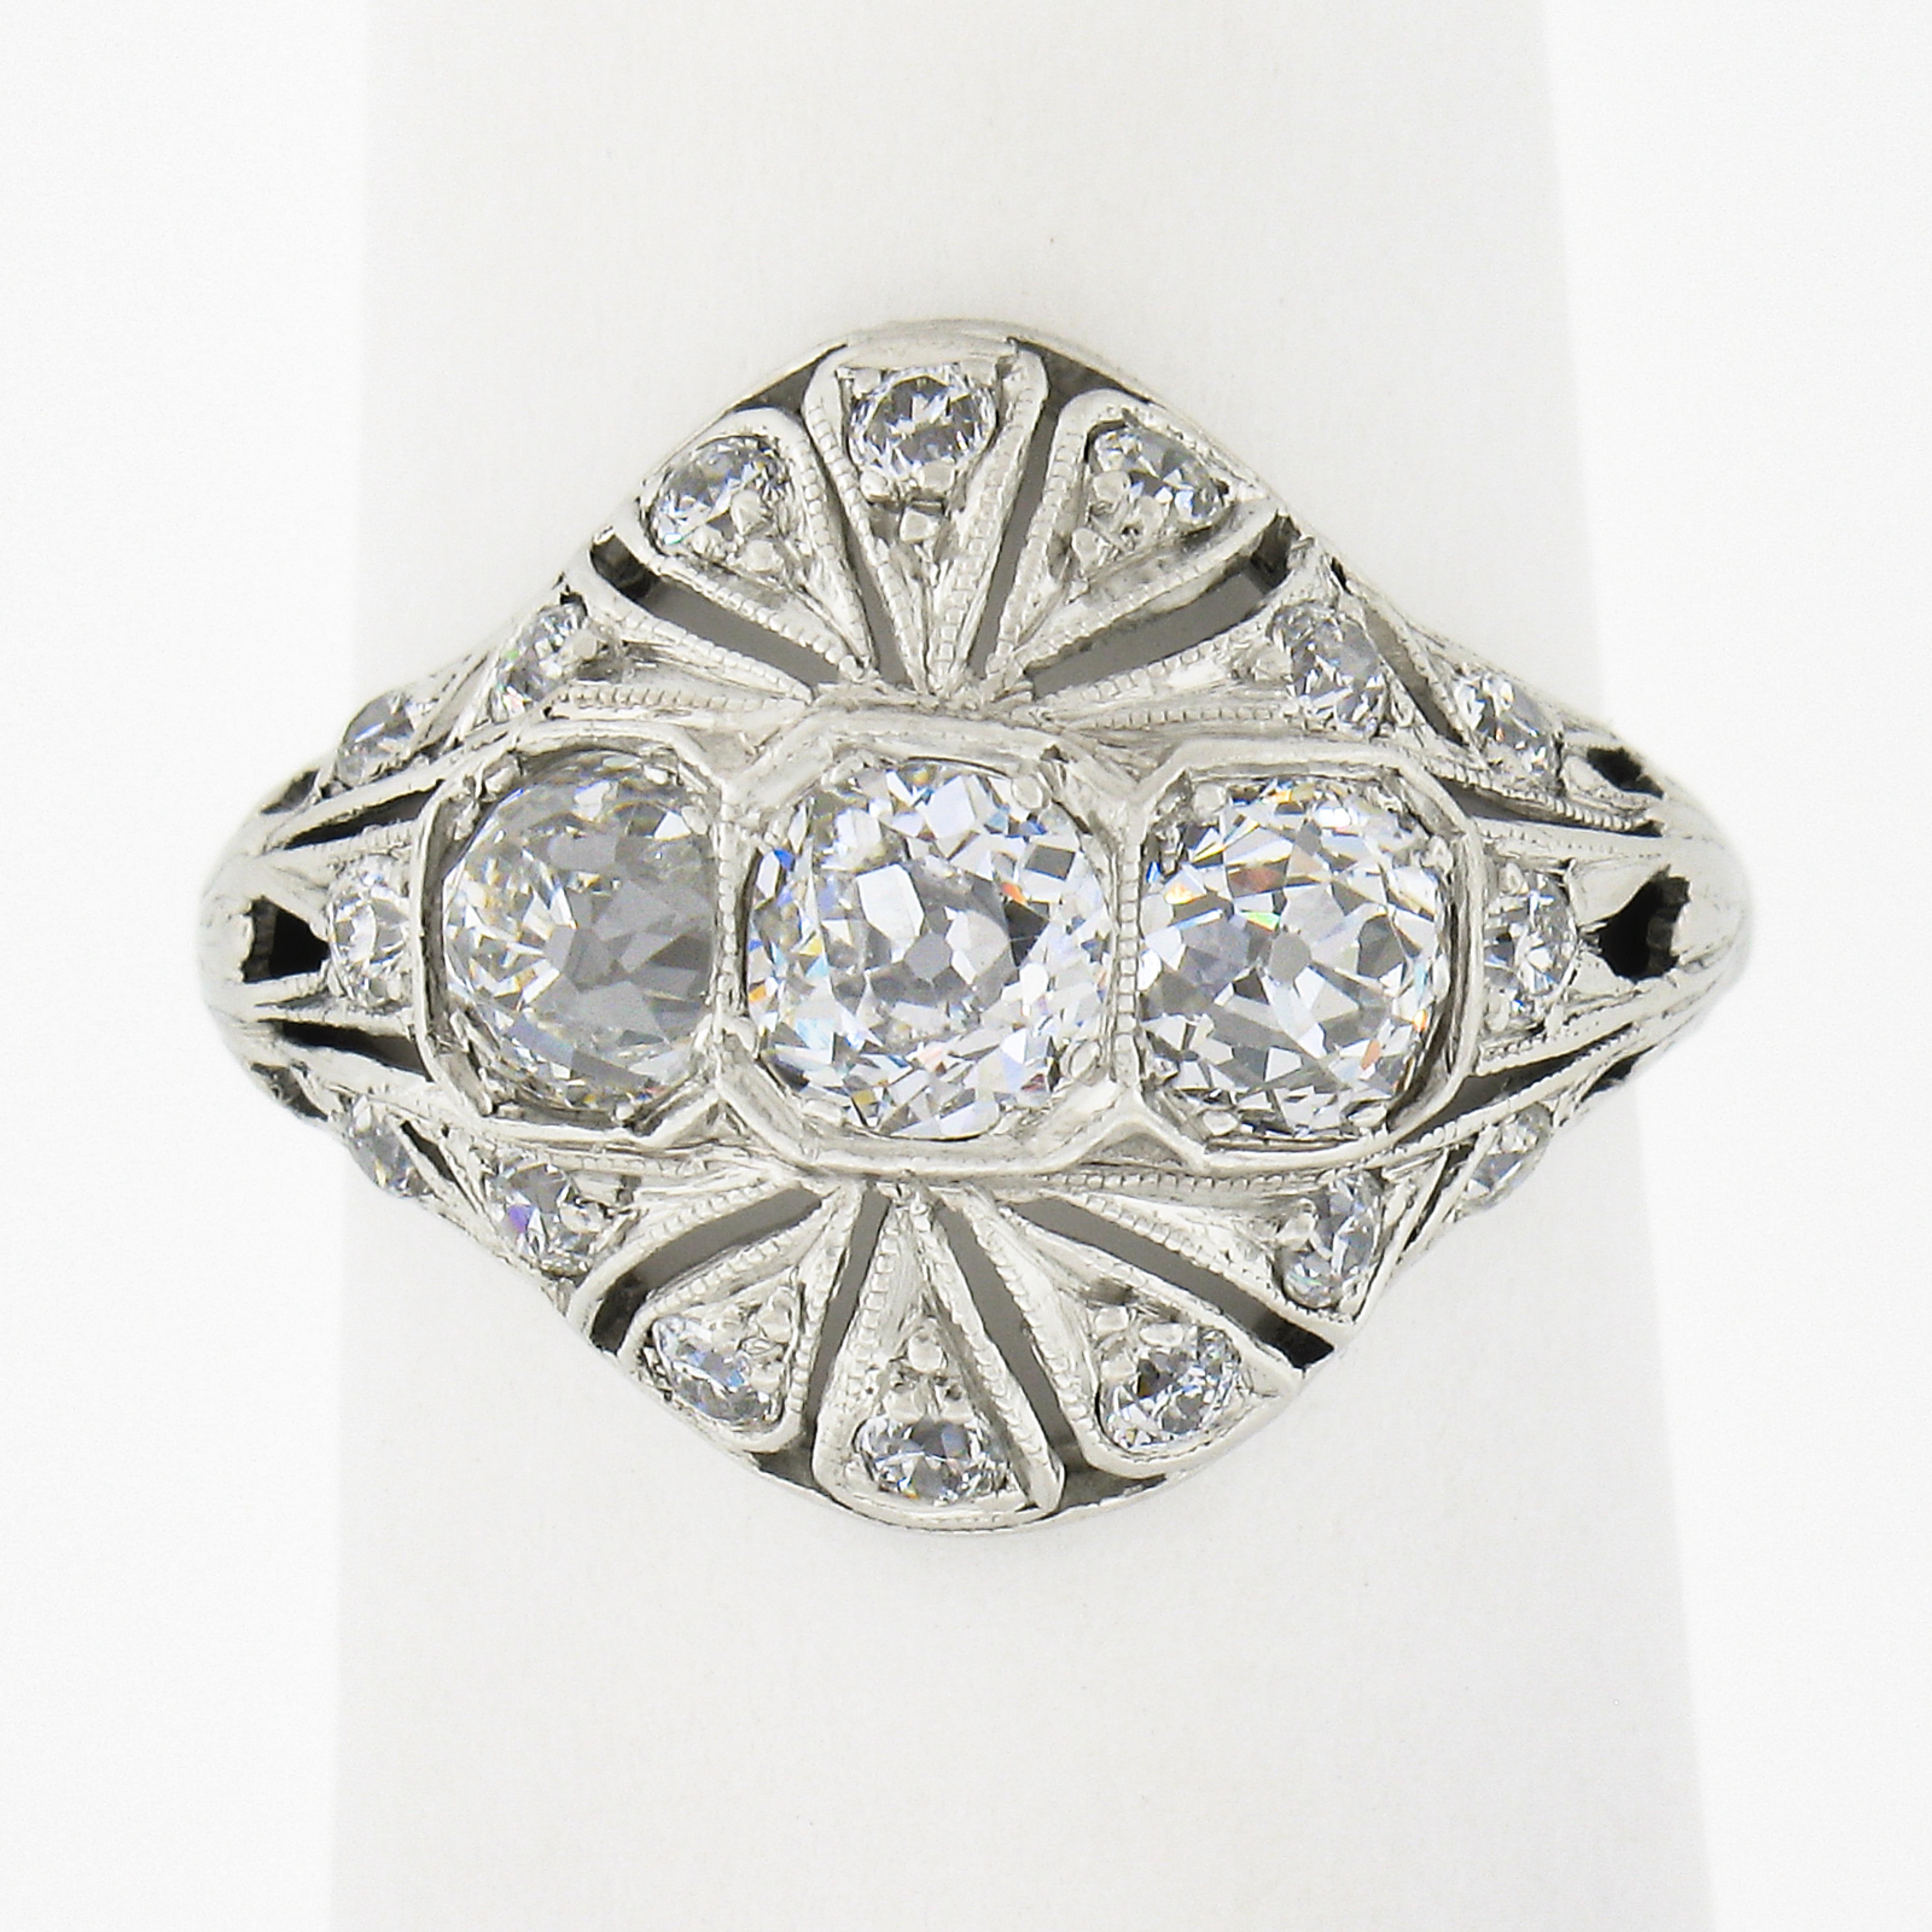 This incredible, all original, antique Edwardian period ring is crafted in solid platinum. It features 3 early old European cut diamonds elegantly pave set across the top in which is further drenched similarly with smaller old cut diamonds